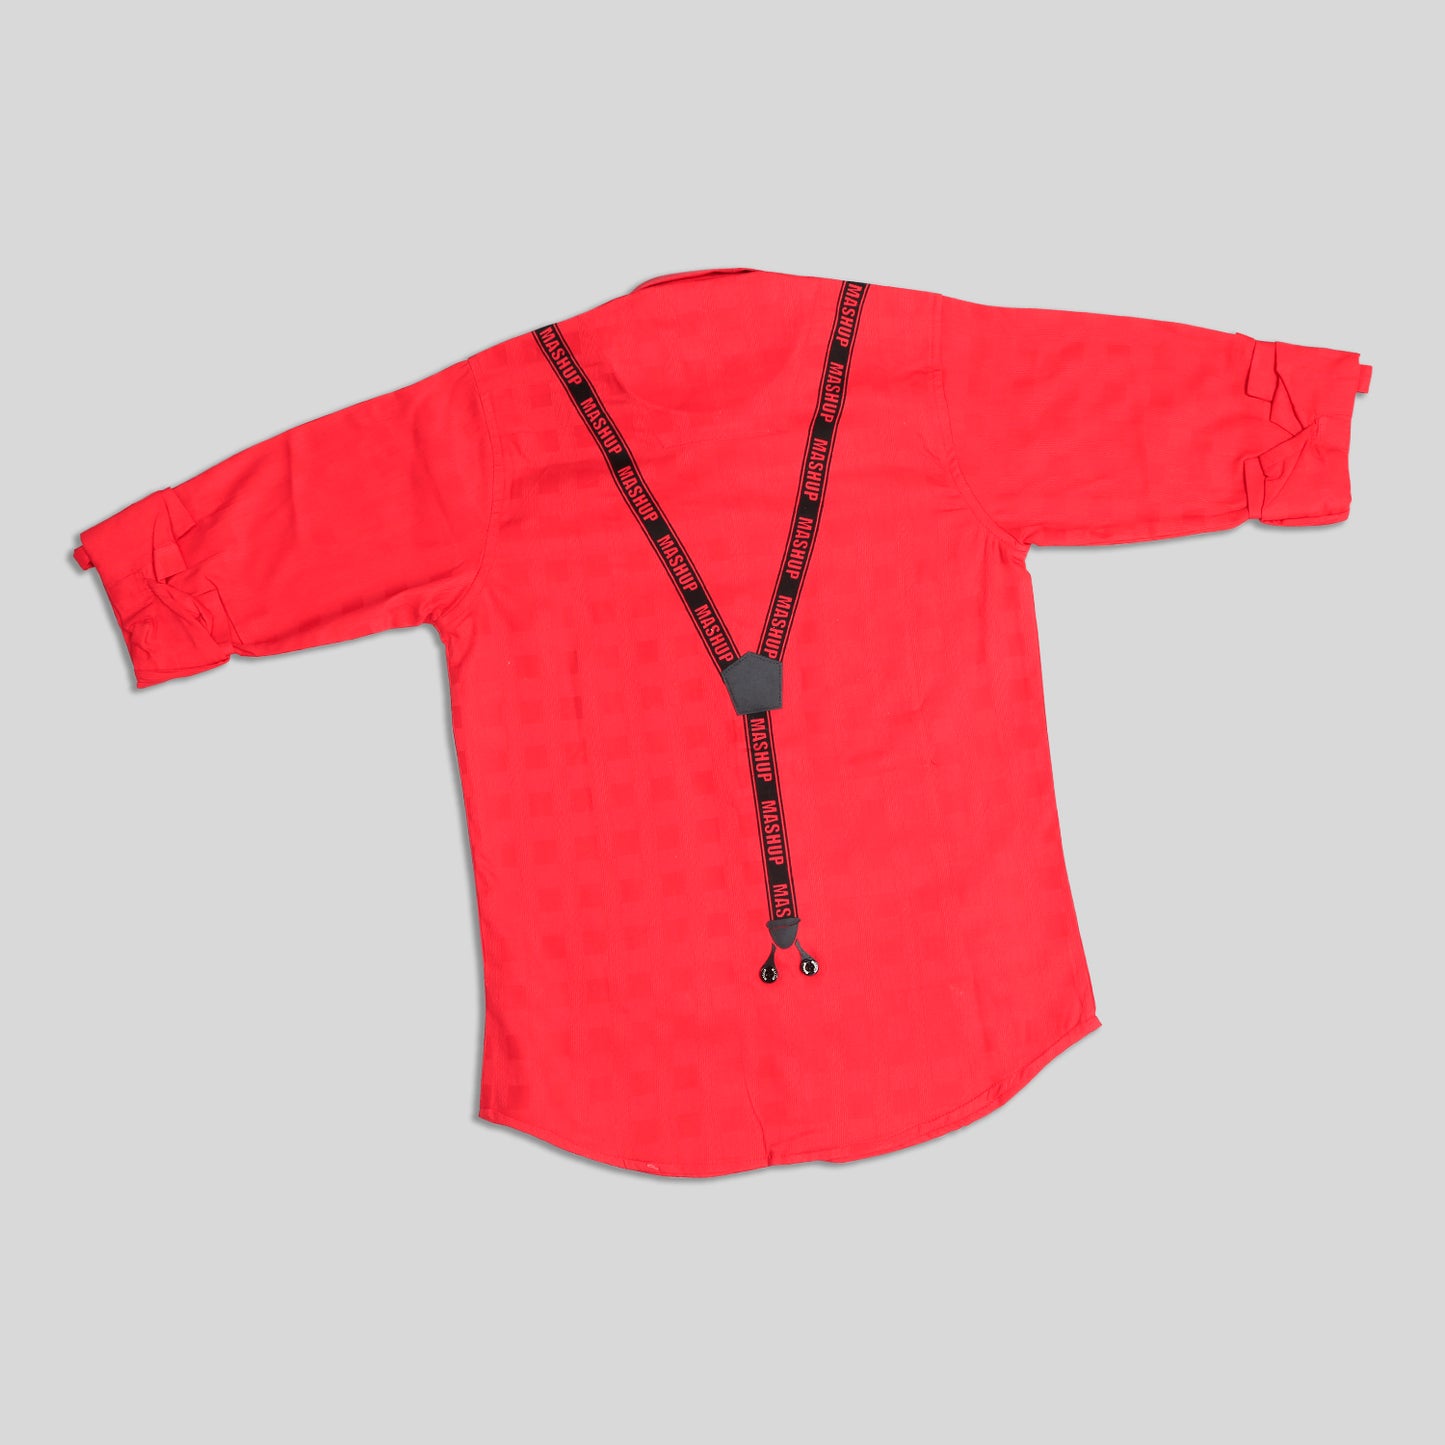 Stylish red cotton Shirt for Young boys